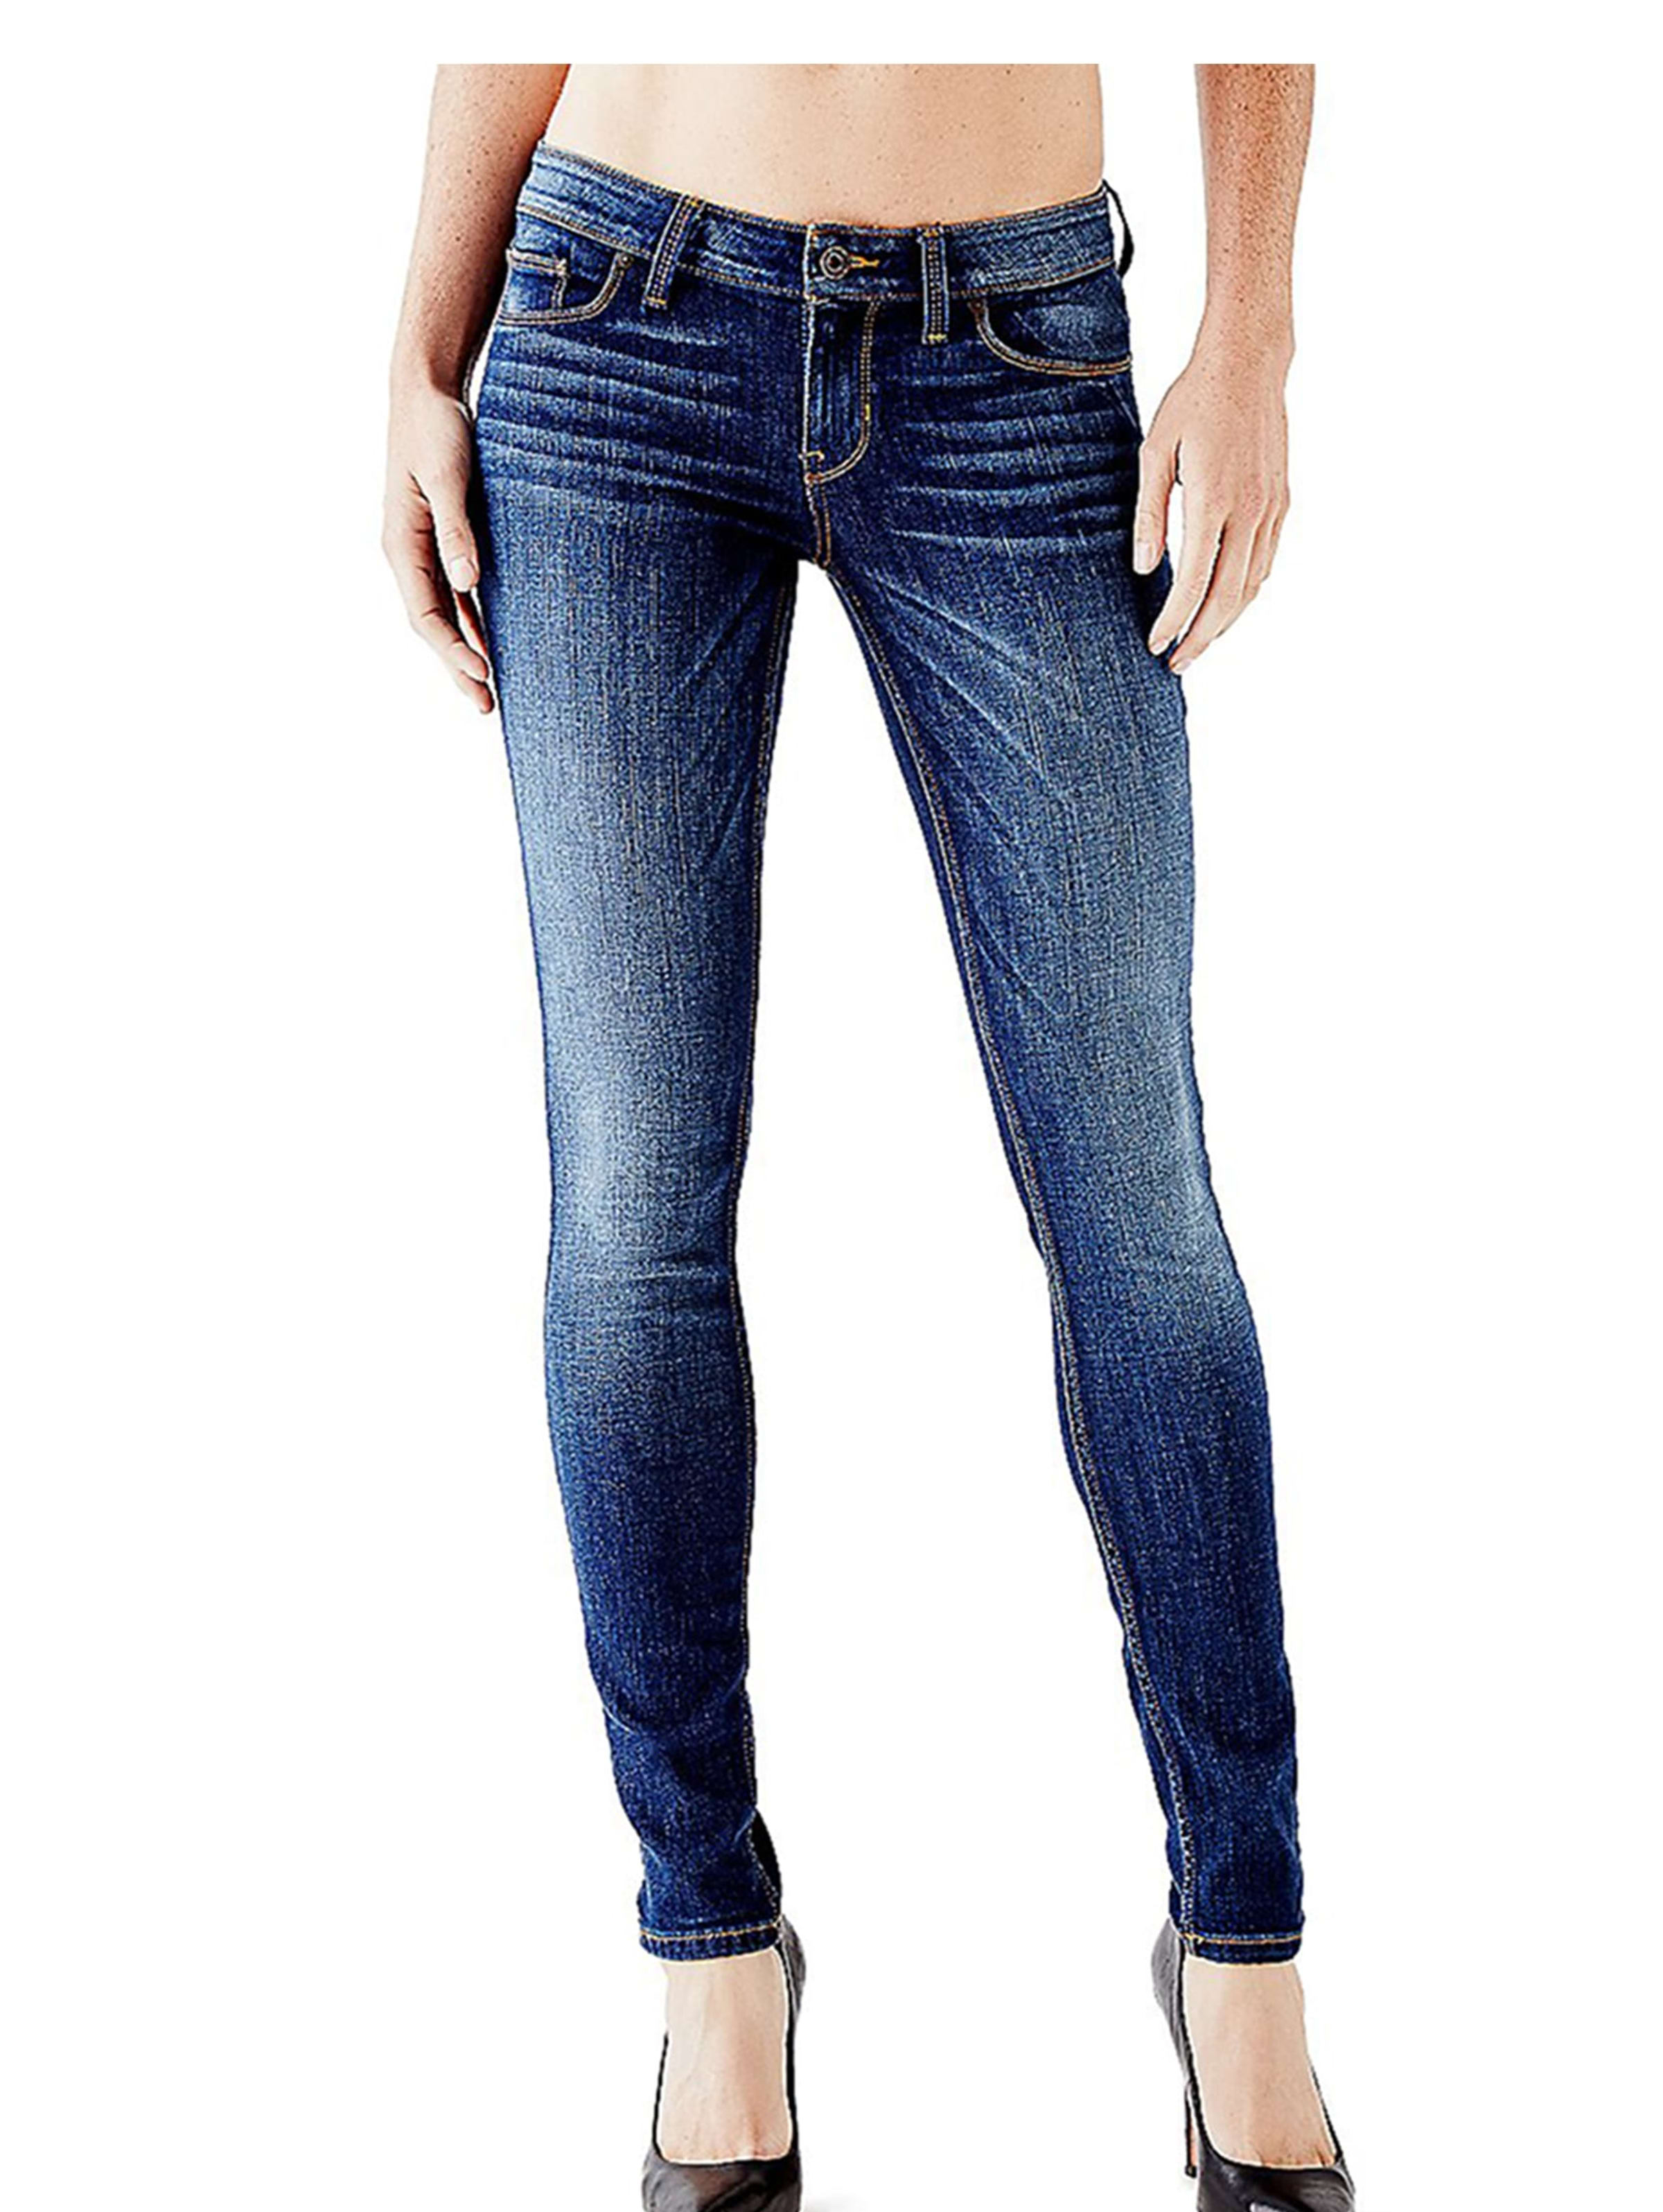 guess low rise skinny jeans